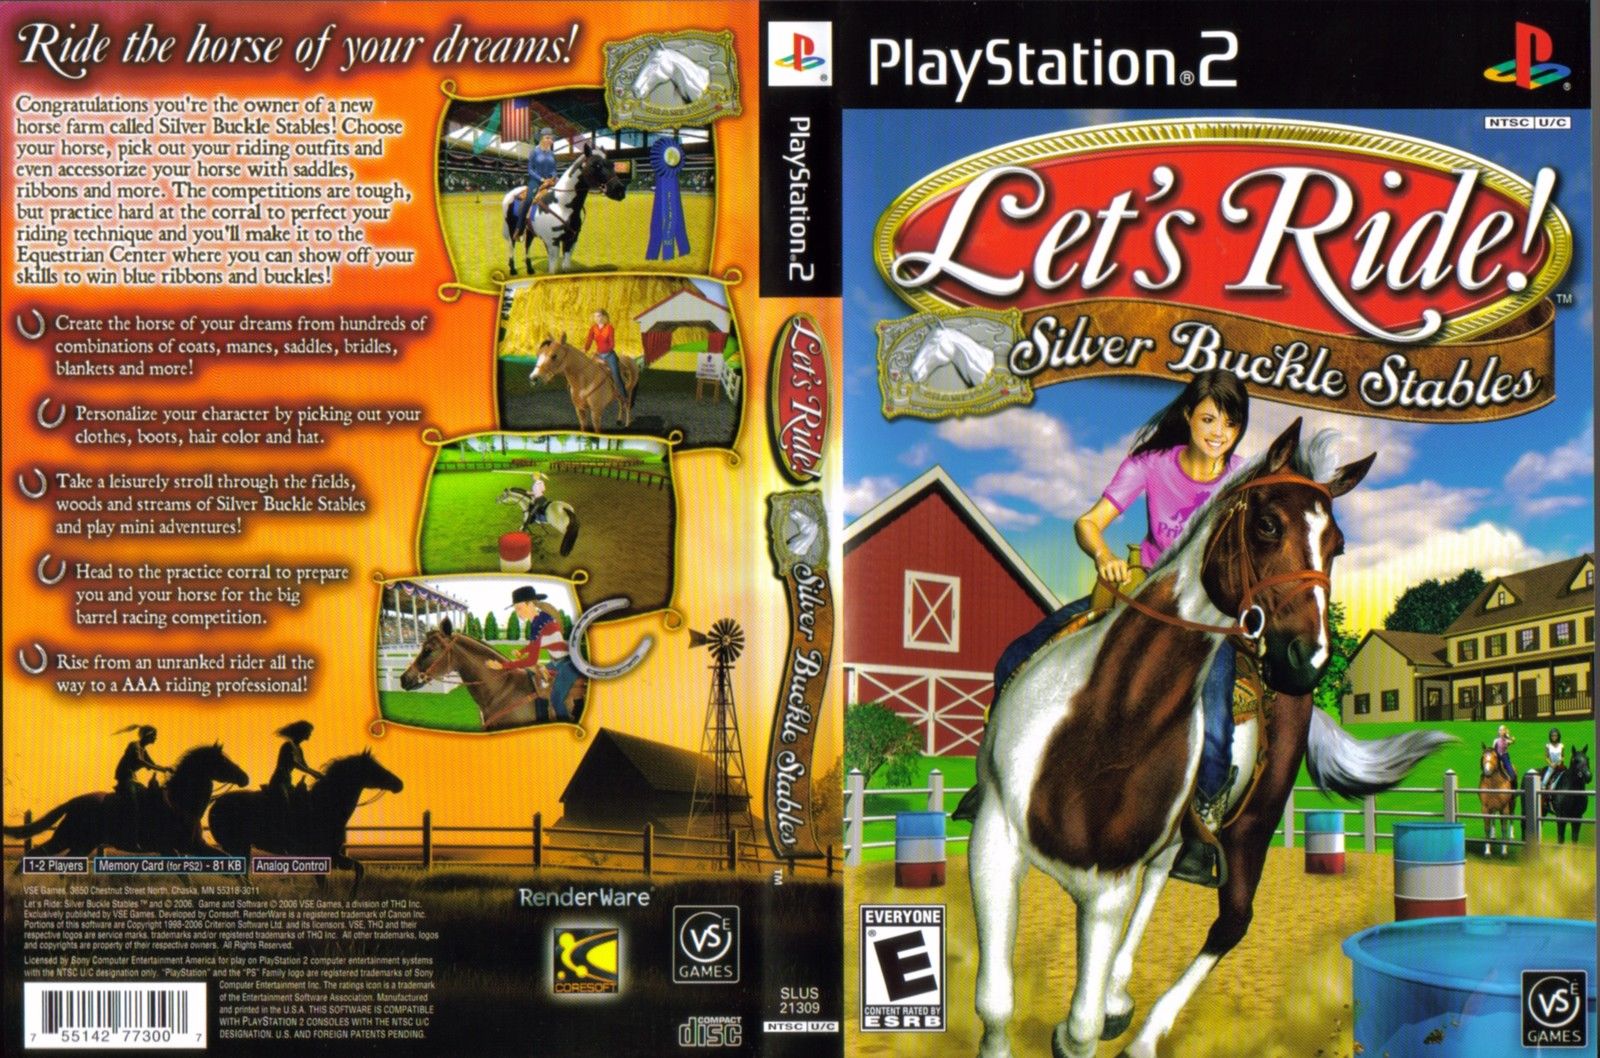 Riding camp. Let's Ride Corral Club игра. Игра Barbie Horse Adventures riding Camp. Let's Ride: Silver Buckle stables. Barbie Horse Adventures: riding Camp ps2.